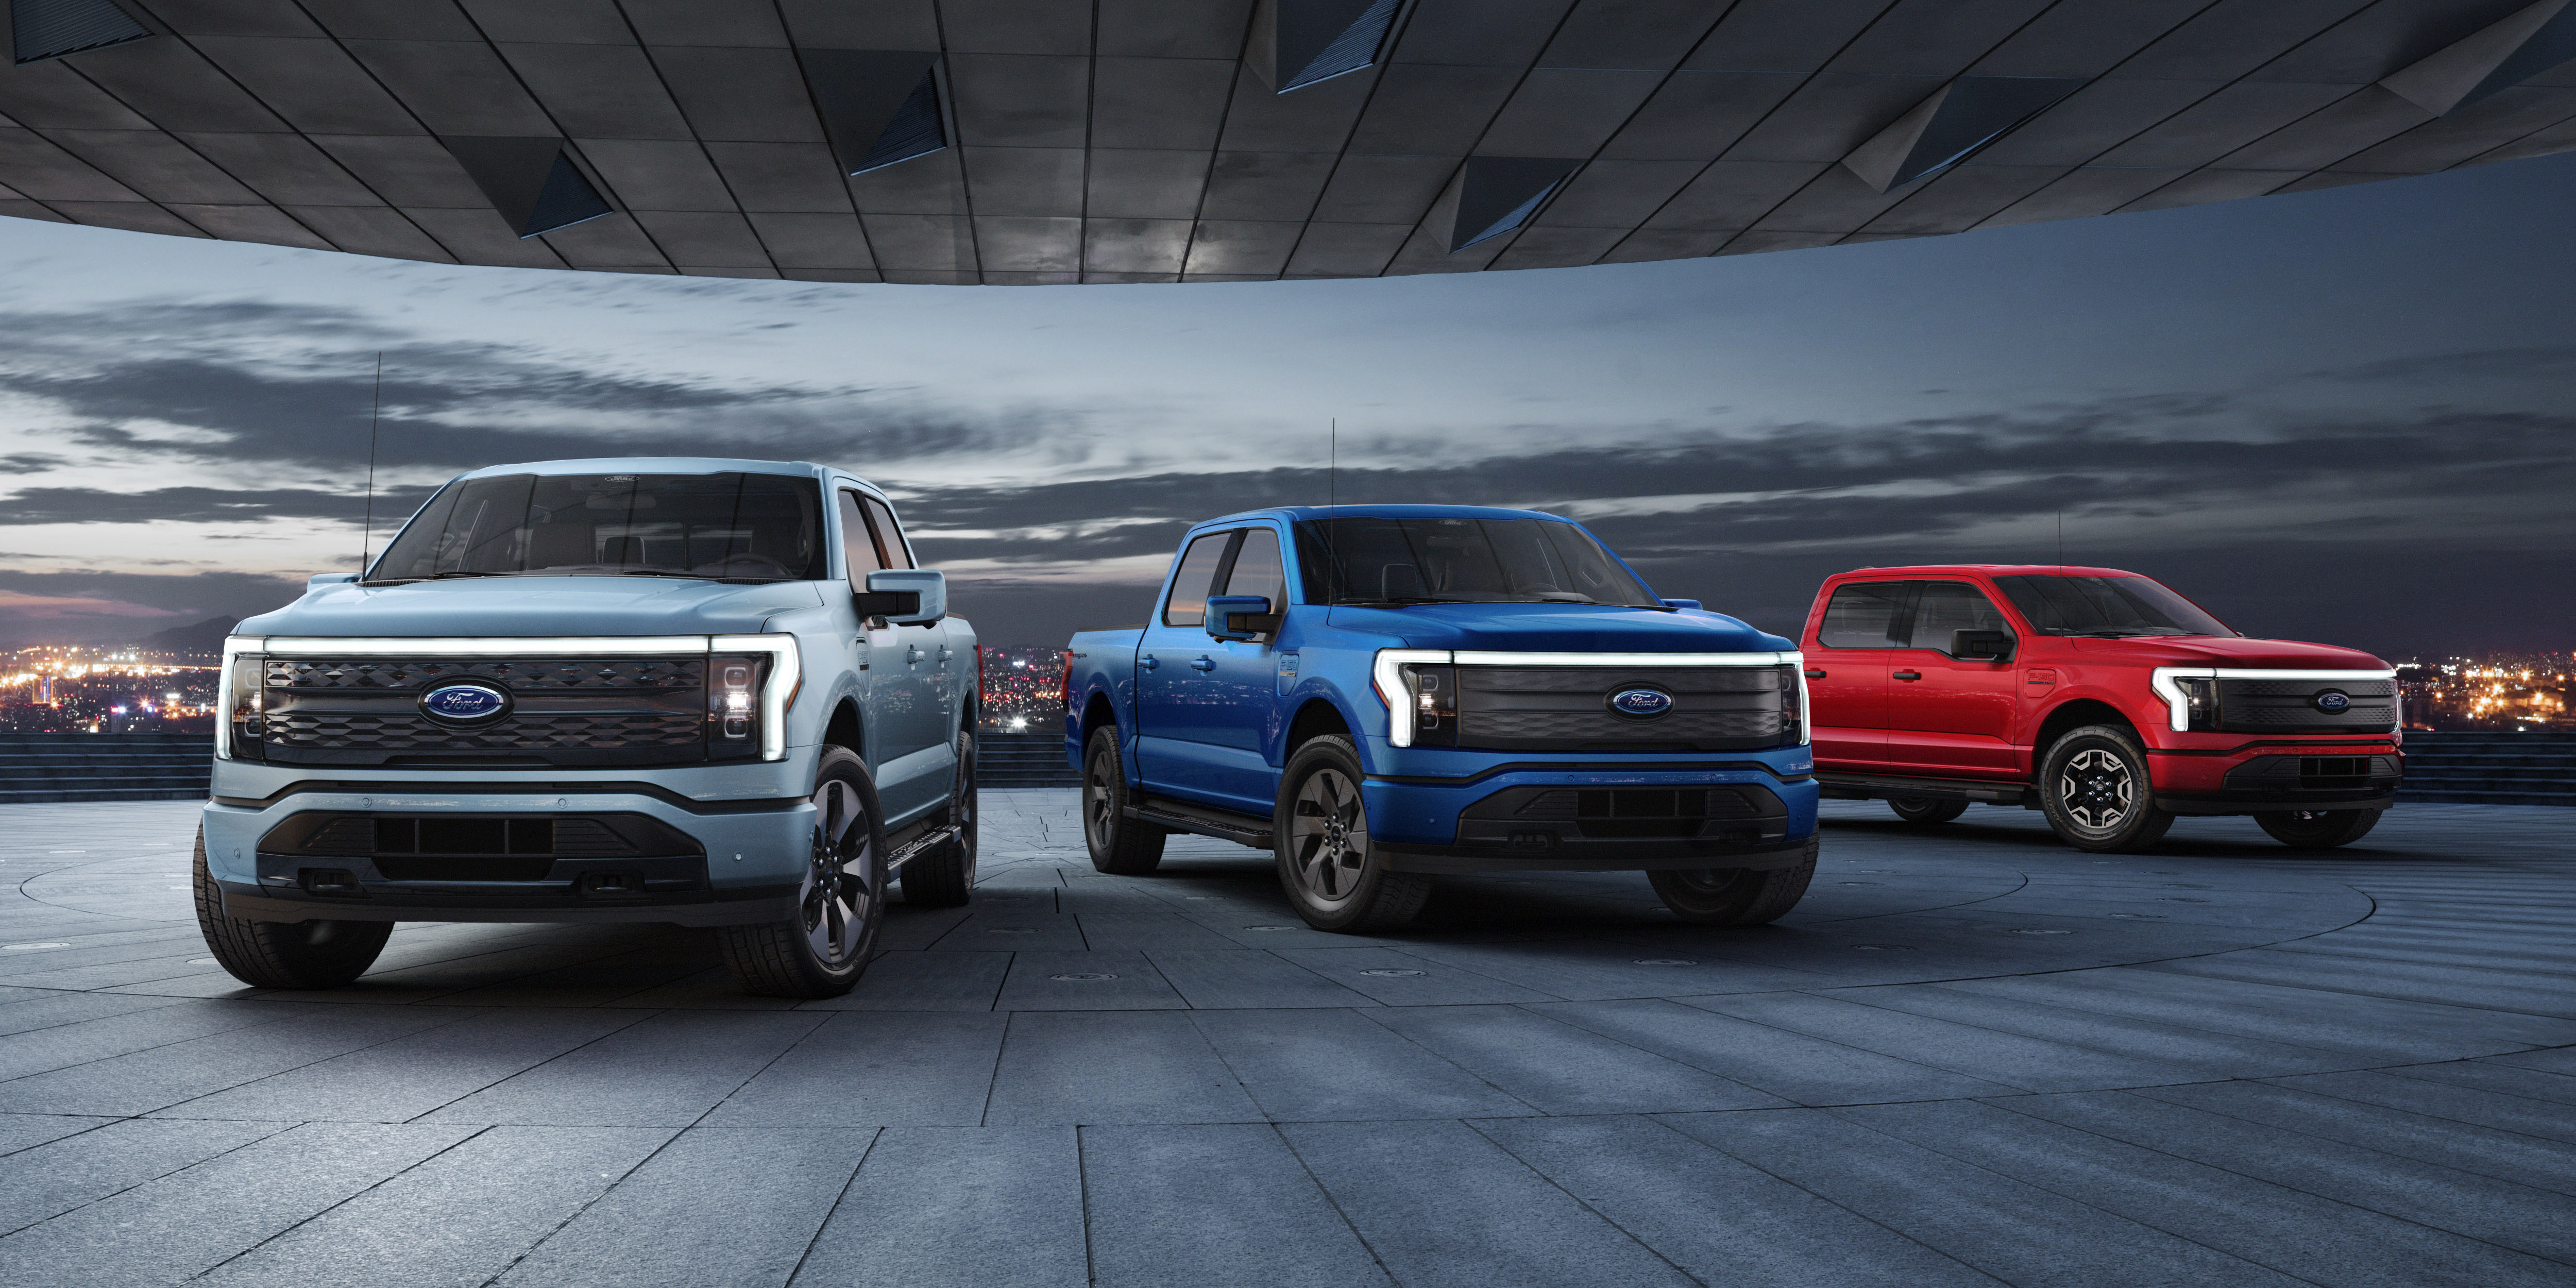 Ford F150 Lightning electric pickup has now 130,000 reservations — is it  good or bad? - Electrek